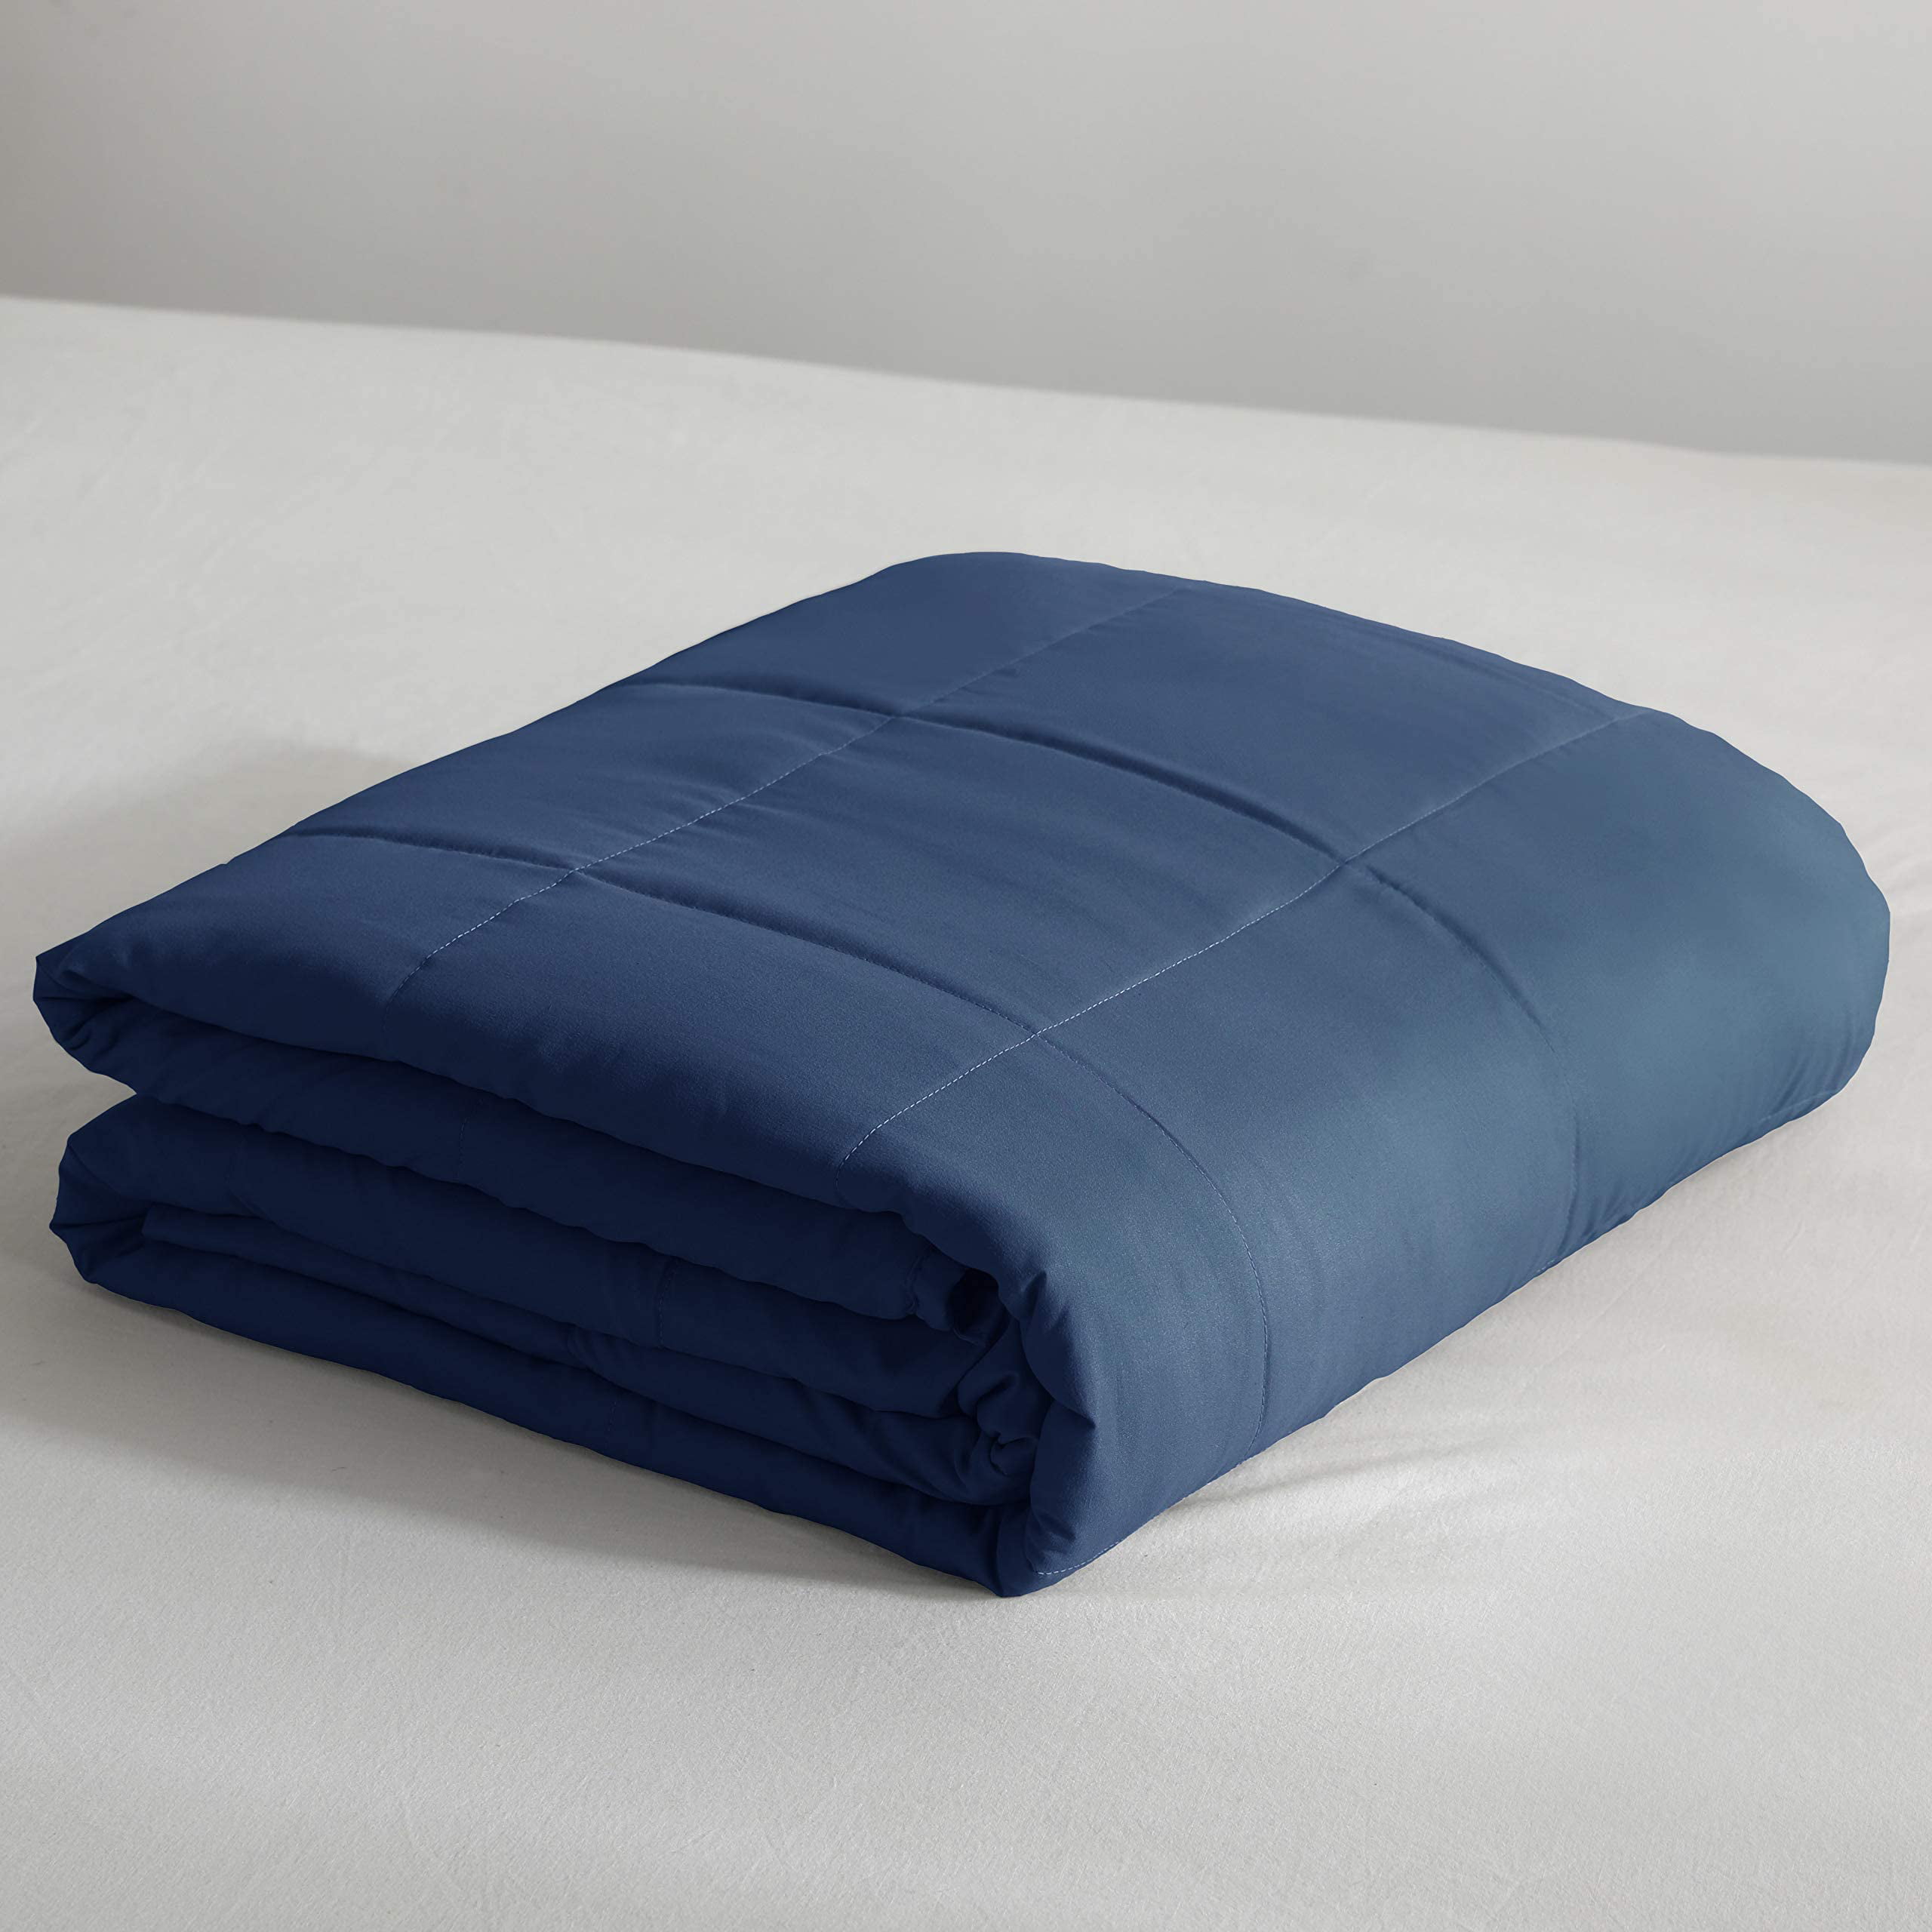 60x80 15lbs Exclusivo Mezcla Navy Weighted Blanket ,Queen Size Heavy Blanket with Premium Glass Beads